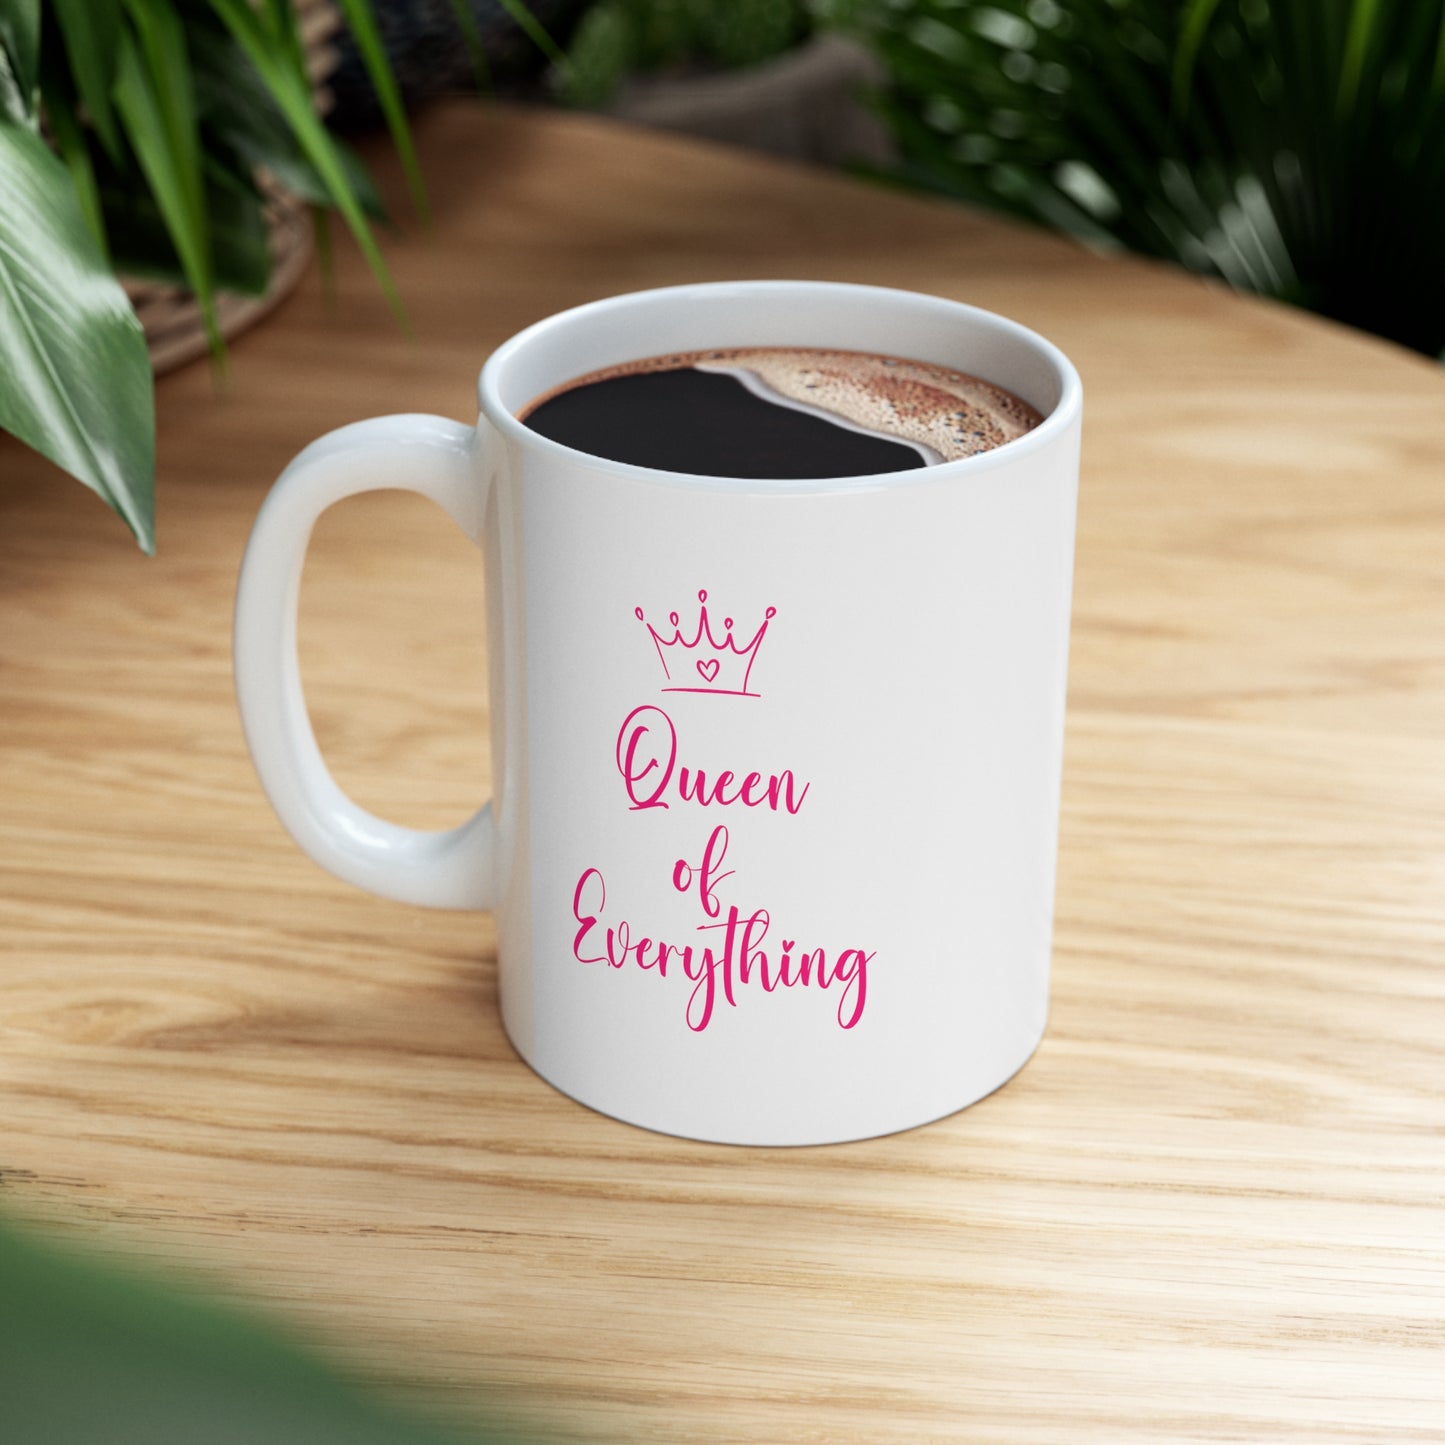 Queen of Everything Mug - Yes I am